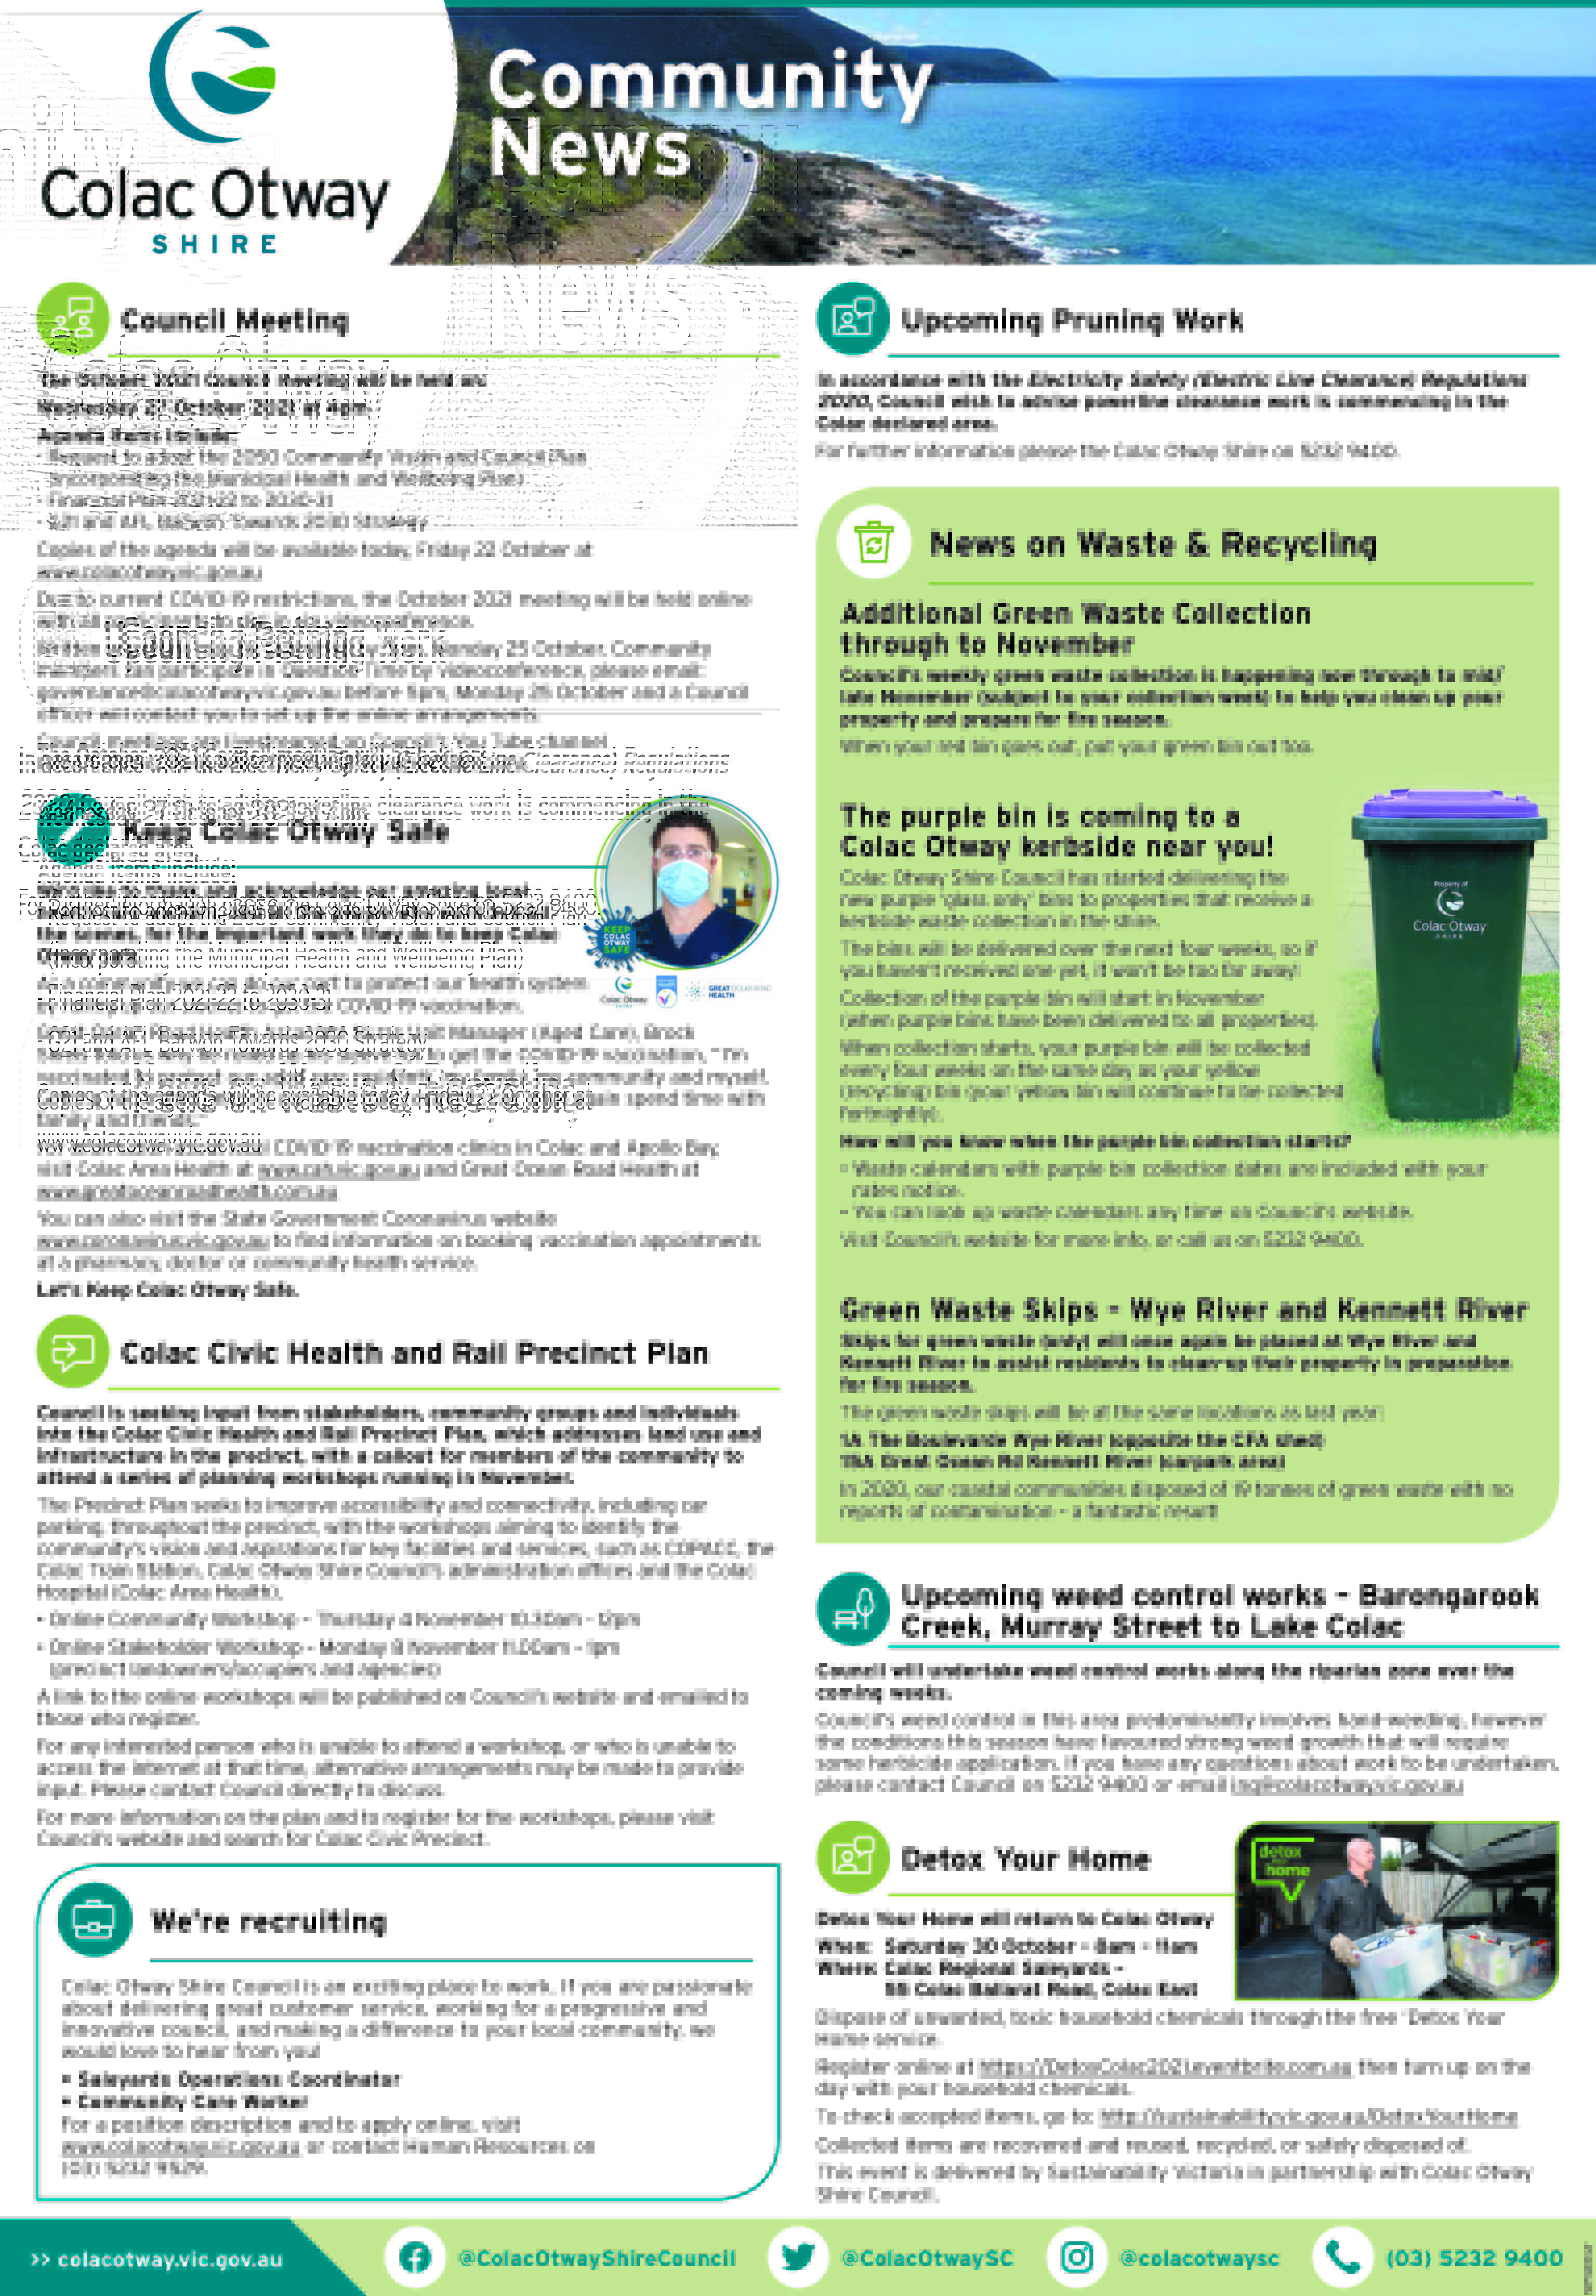 D21 230755 20211022 - Advertisement - Colac Herald - News from Colac Otway Shire Council.jpg